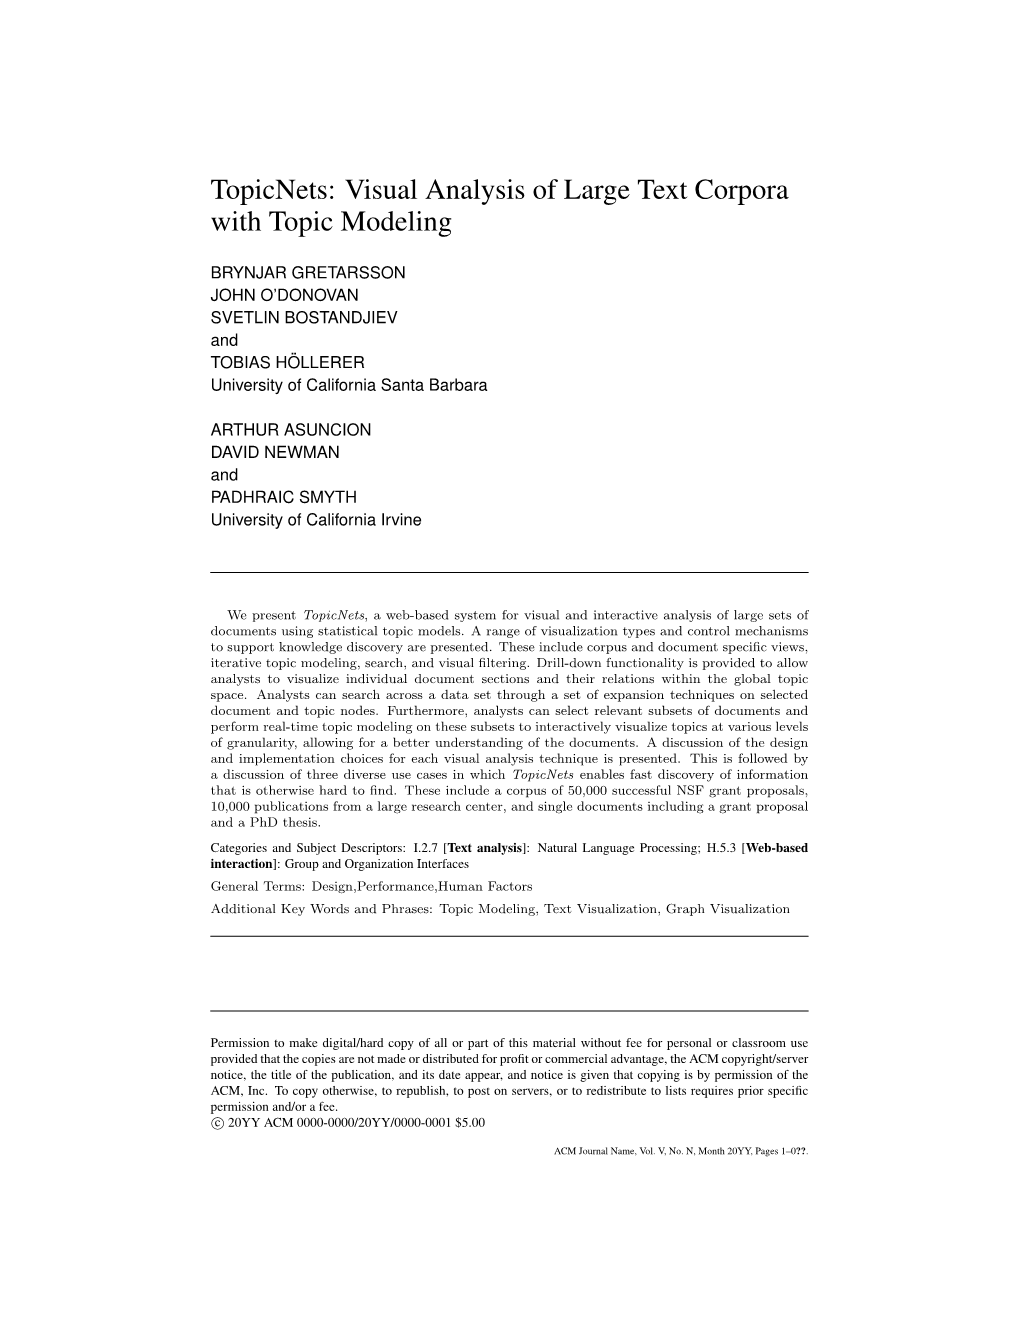 Topicnets: Visual Analysis of Large Text Corpora with Topic Modeling